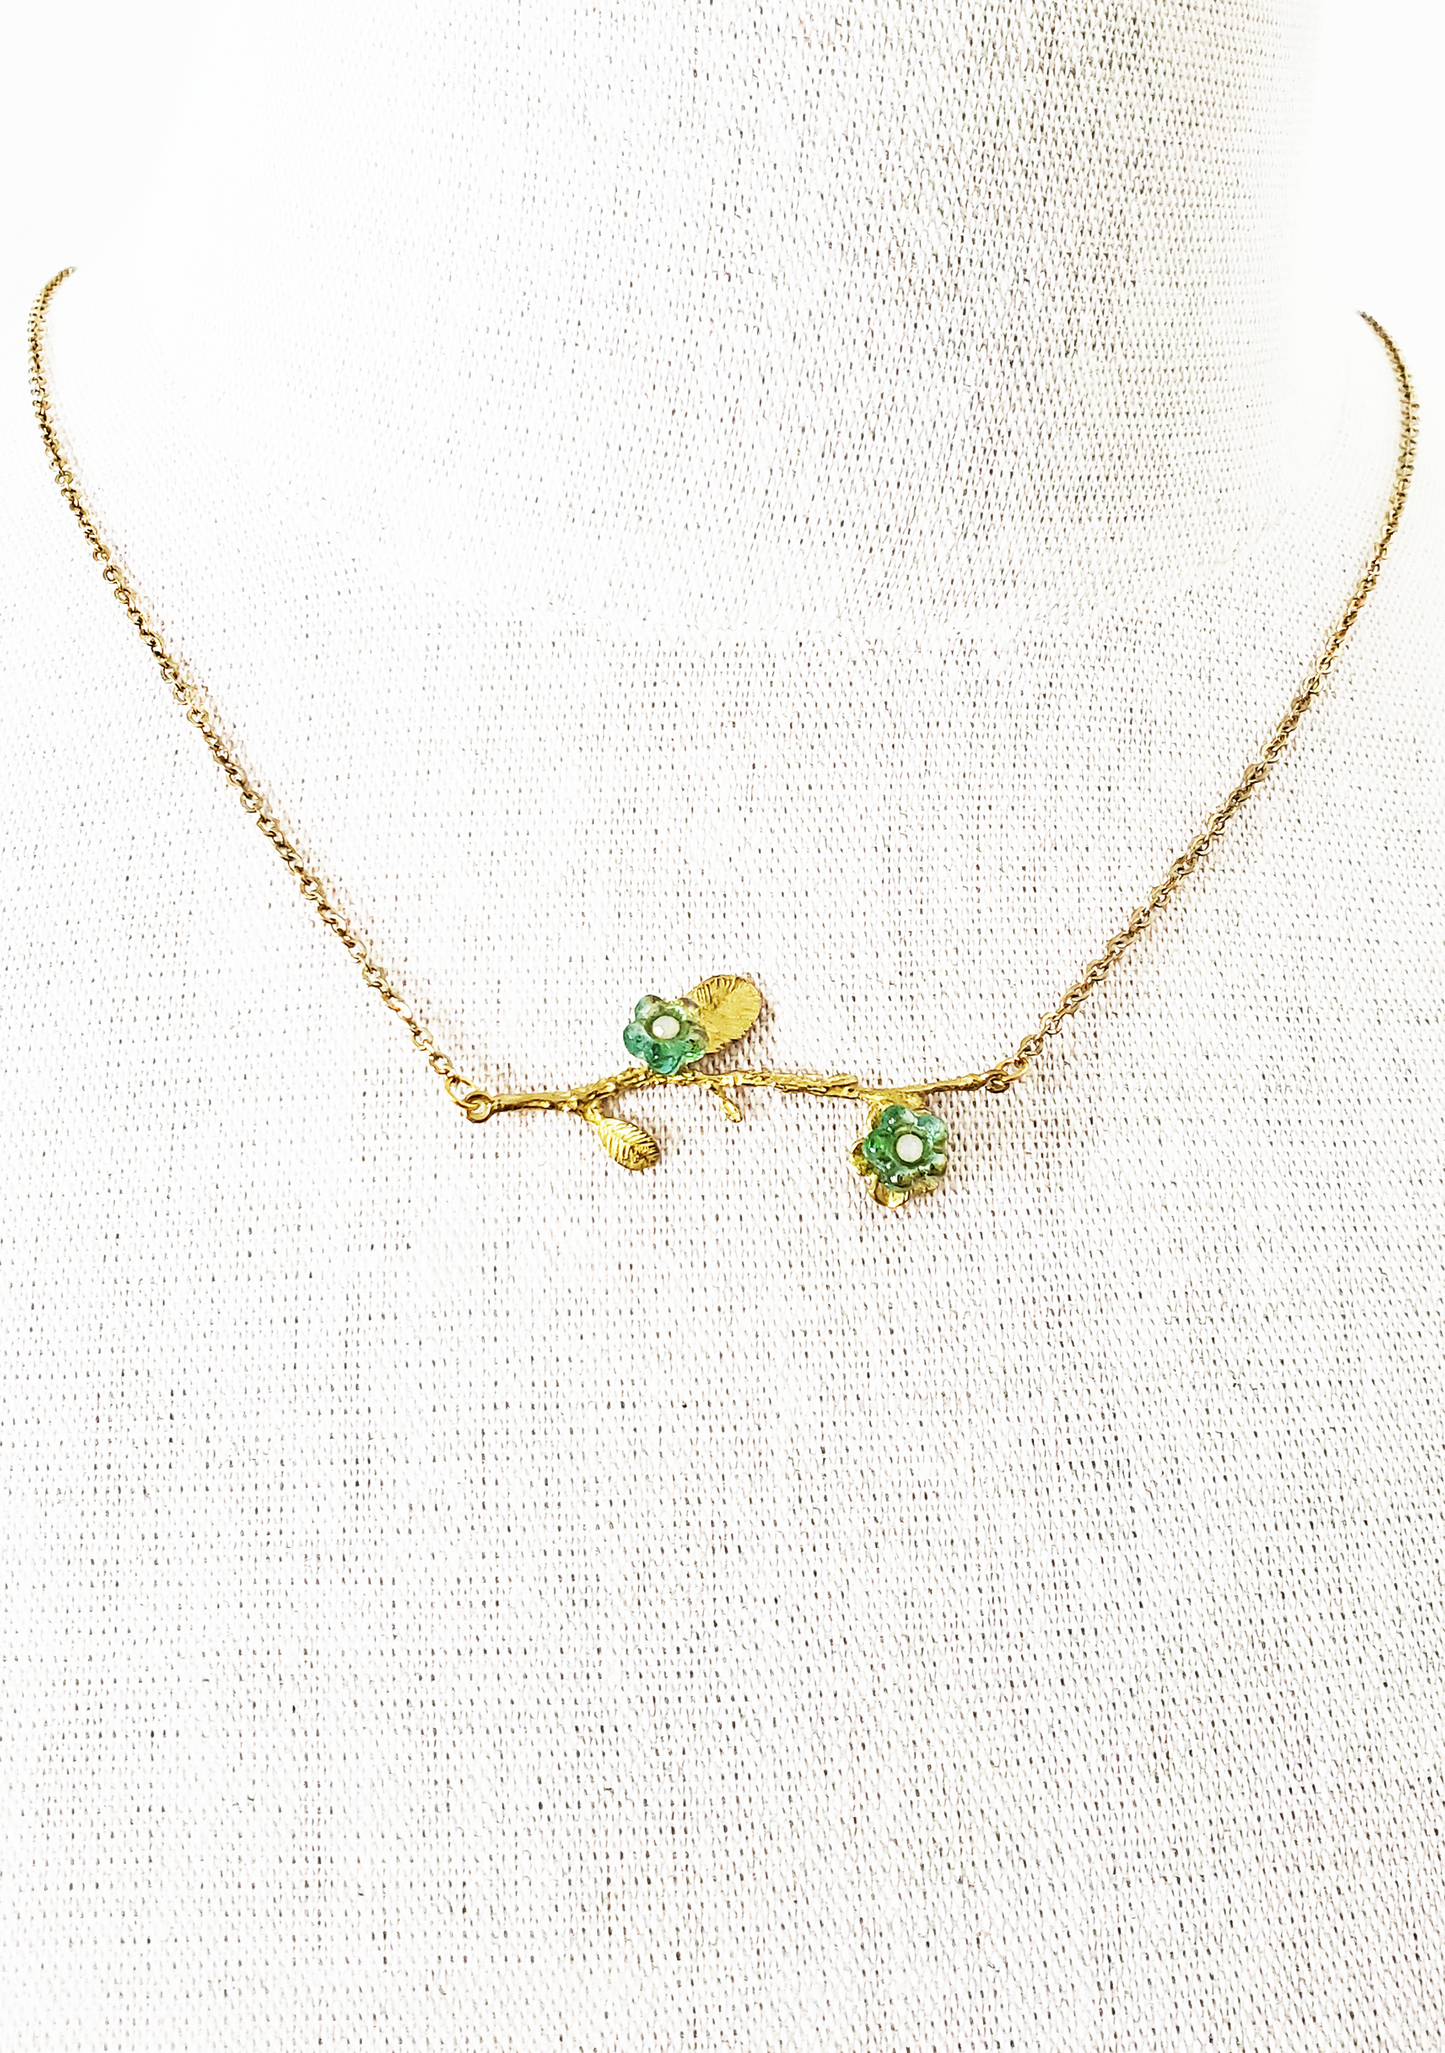 Branch and Green Flower Pendant Necklace